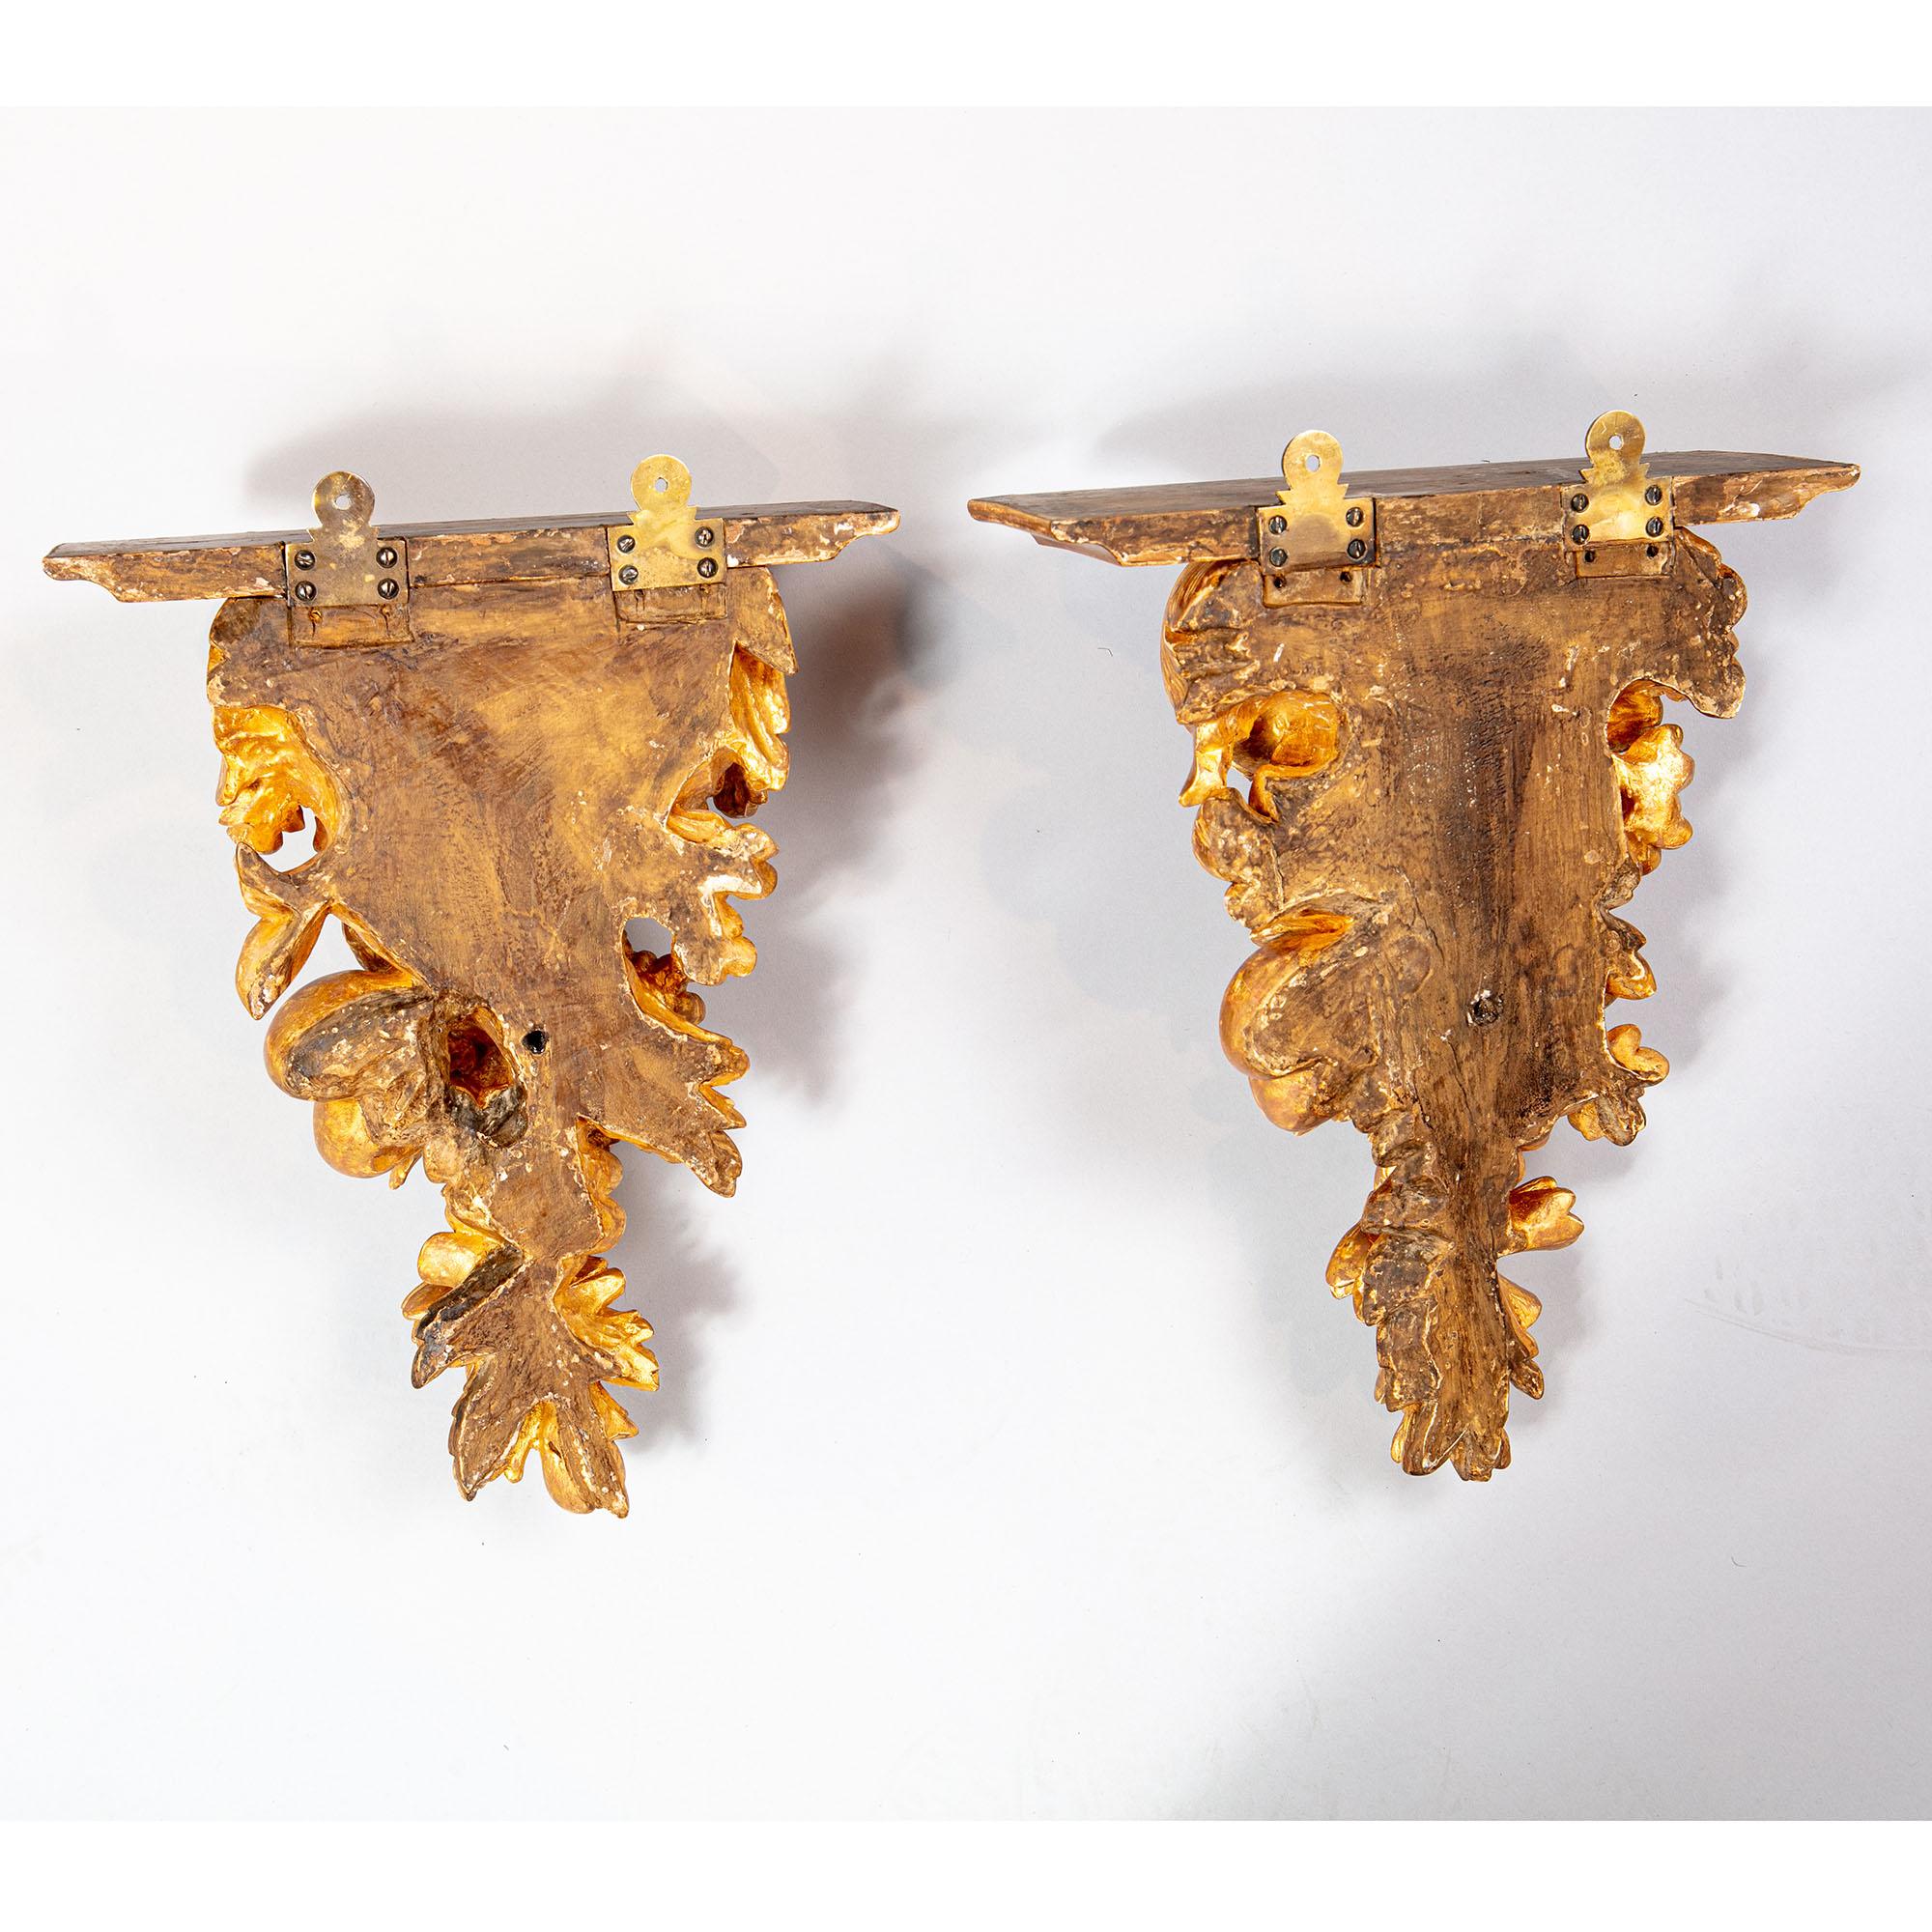 Pair of George III Giltwood Wall Brackets For Sale 2